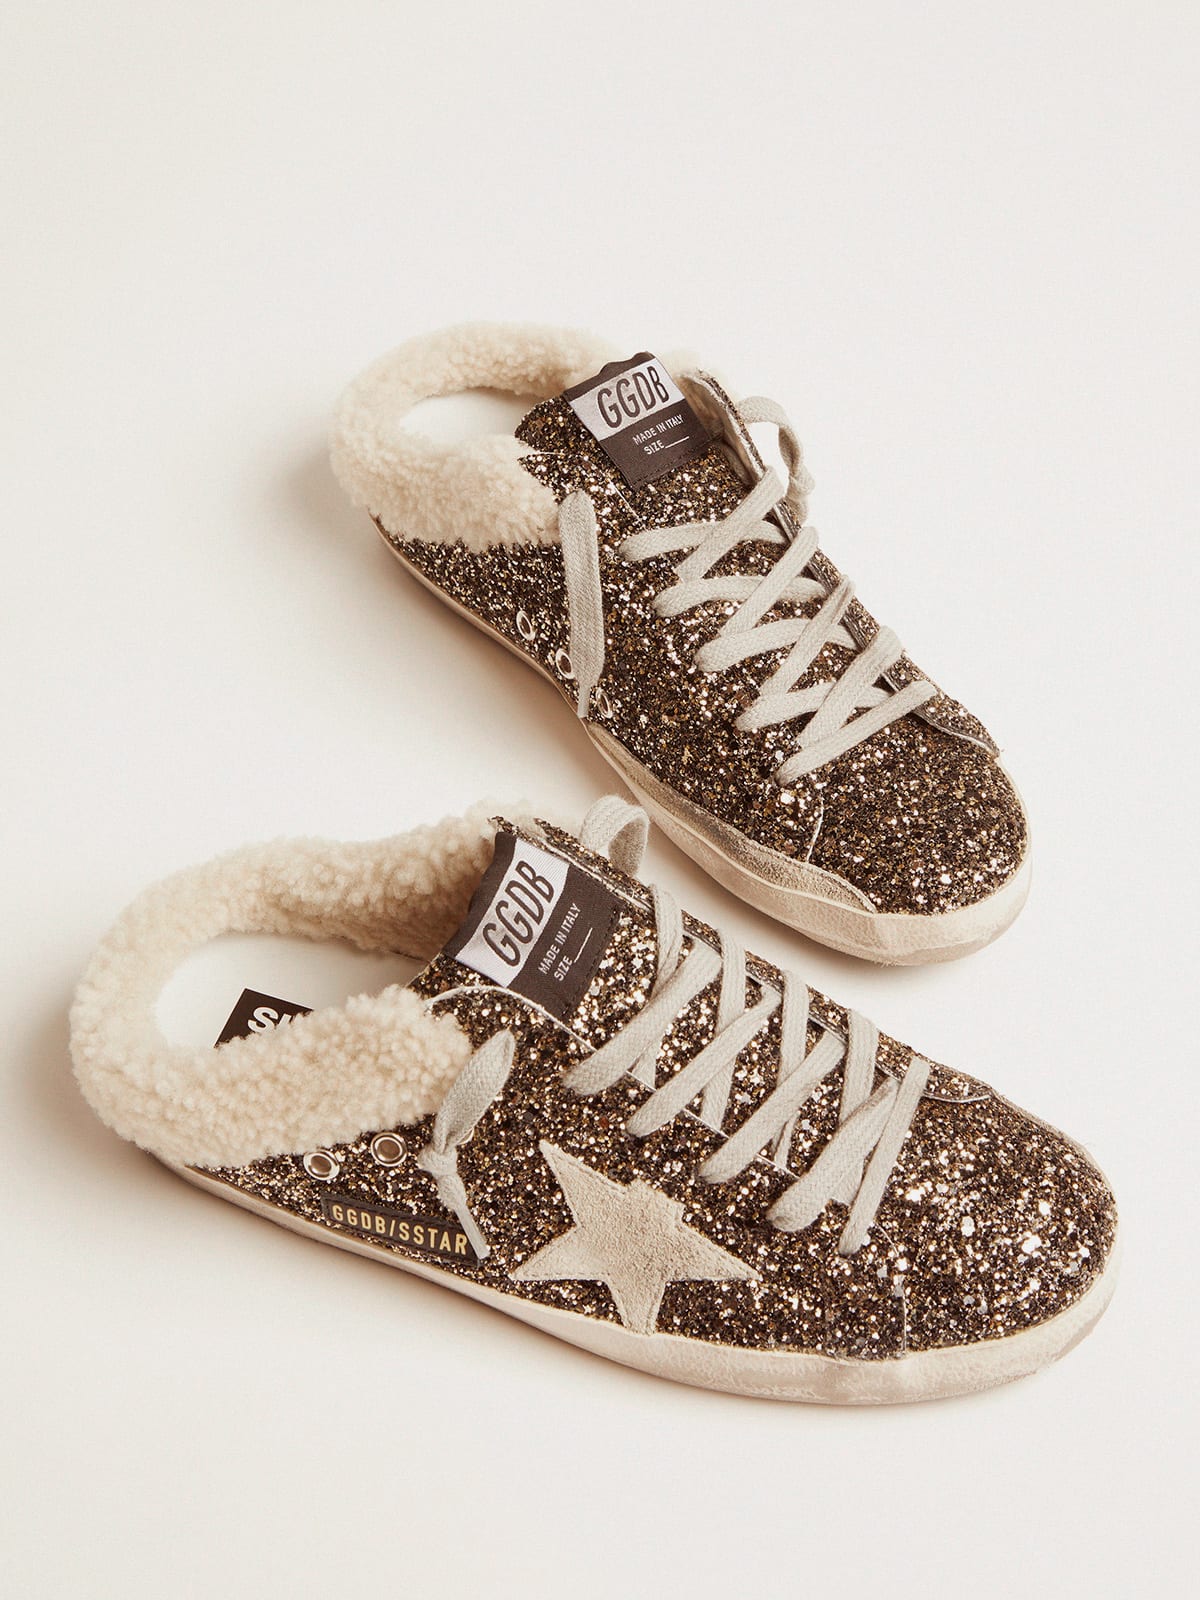 Golden Goose - Super-Star sabot-style sneakers with glitter and shearling lining in 